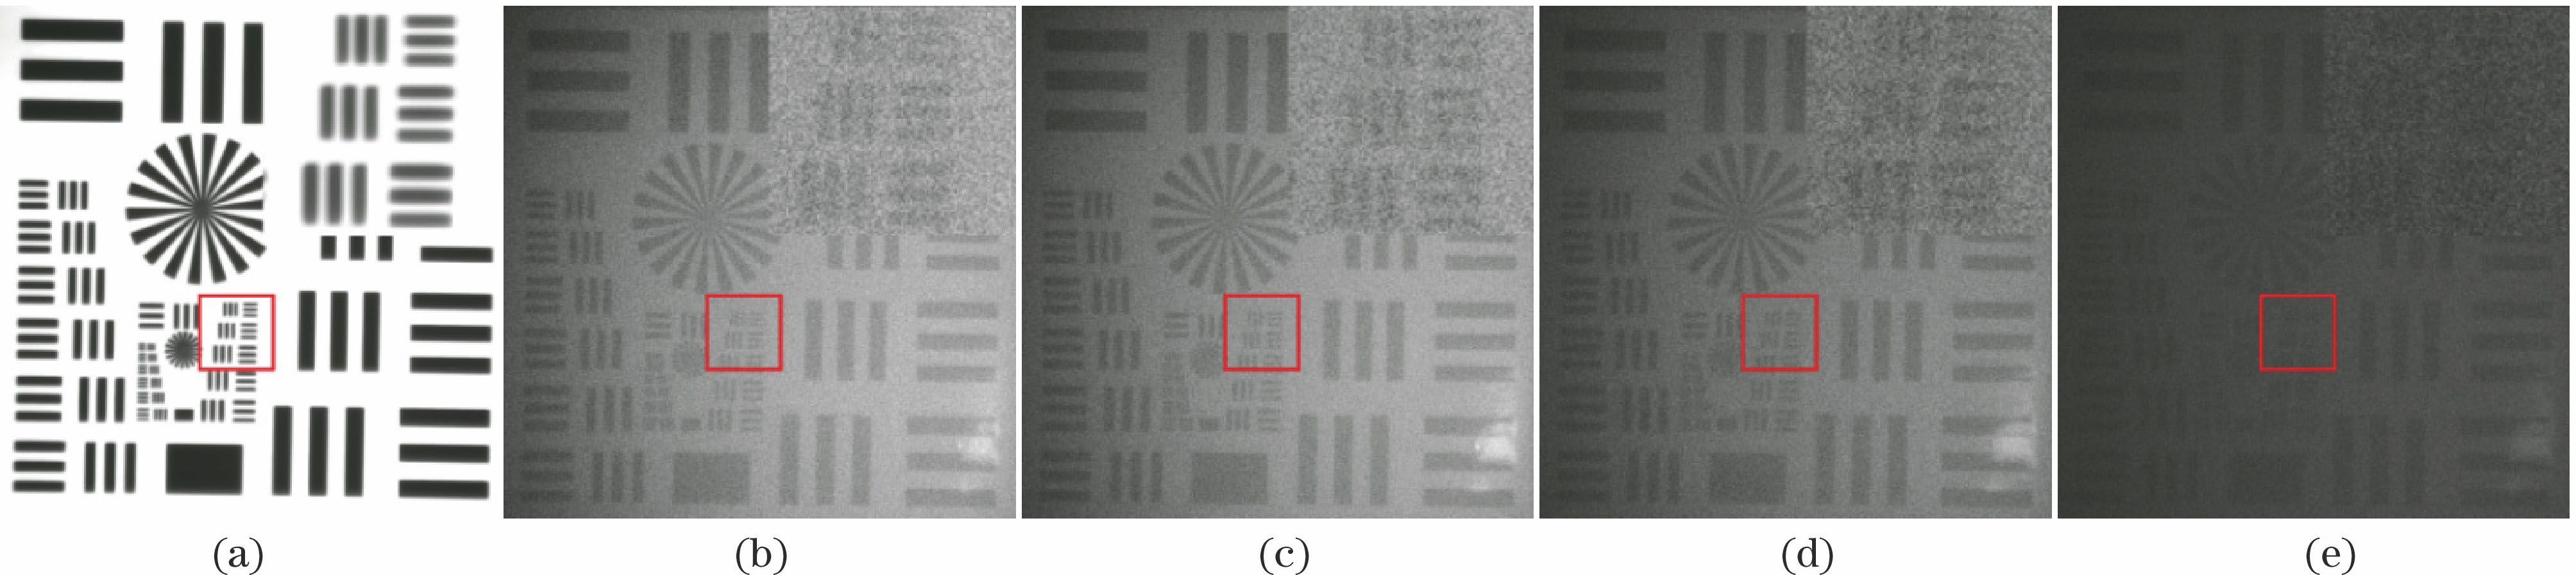 Images of test board 1 under different illuminations. (a) Target 1 in the clear water; (b) 21.614l lx; (c) 13.826 lx; (d) 6.947 lx; (e) 0.925 lx